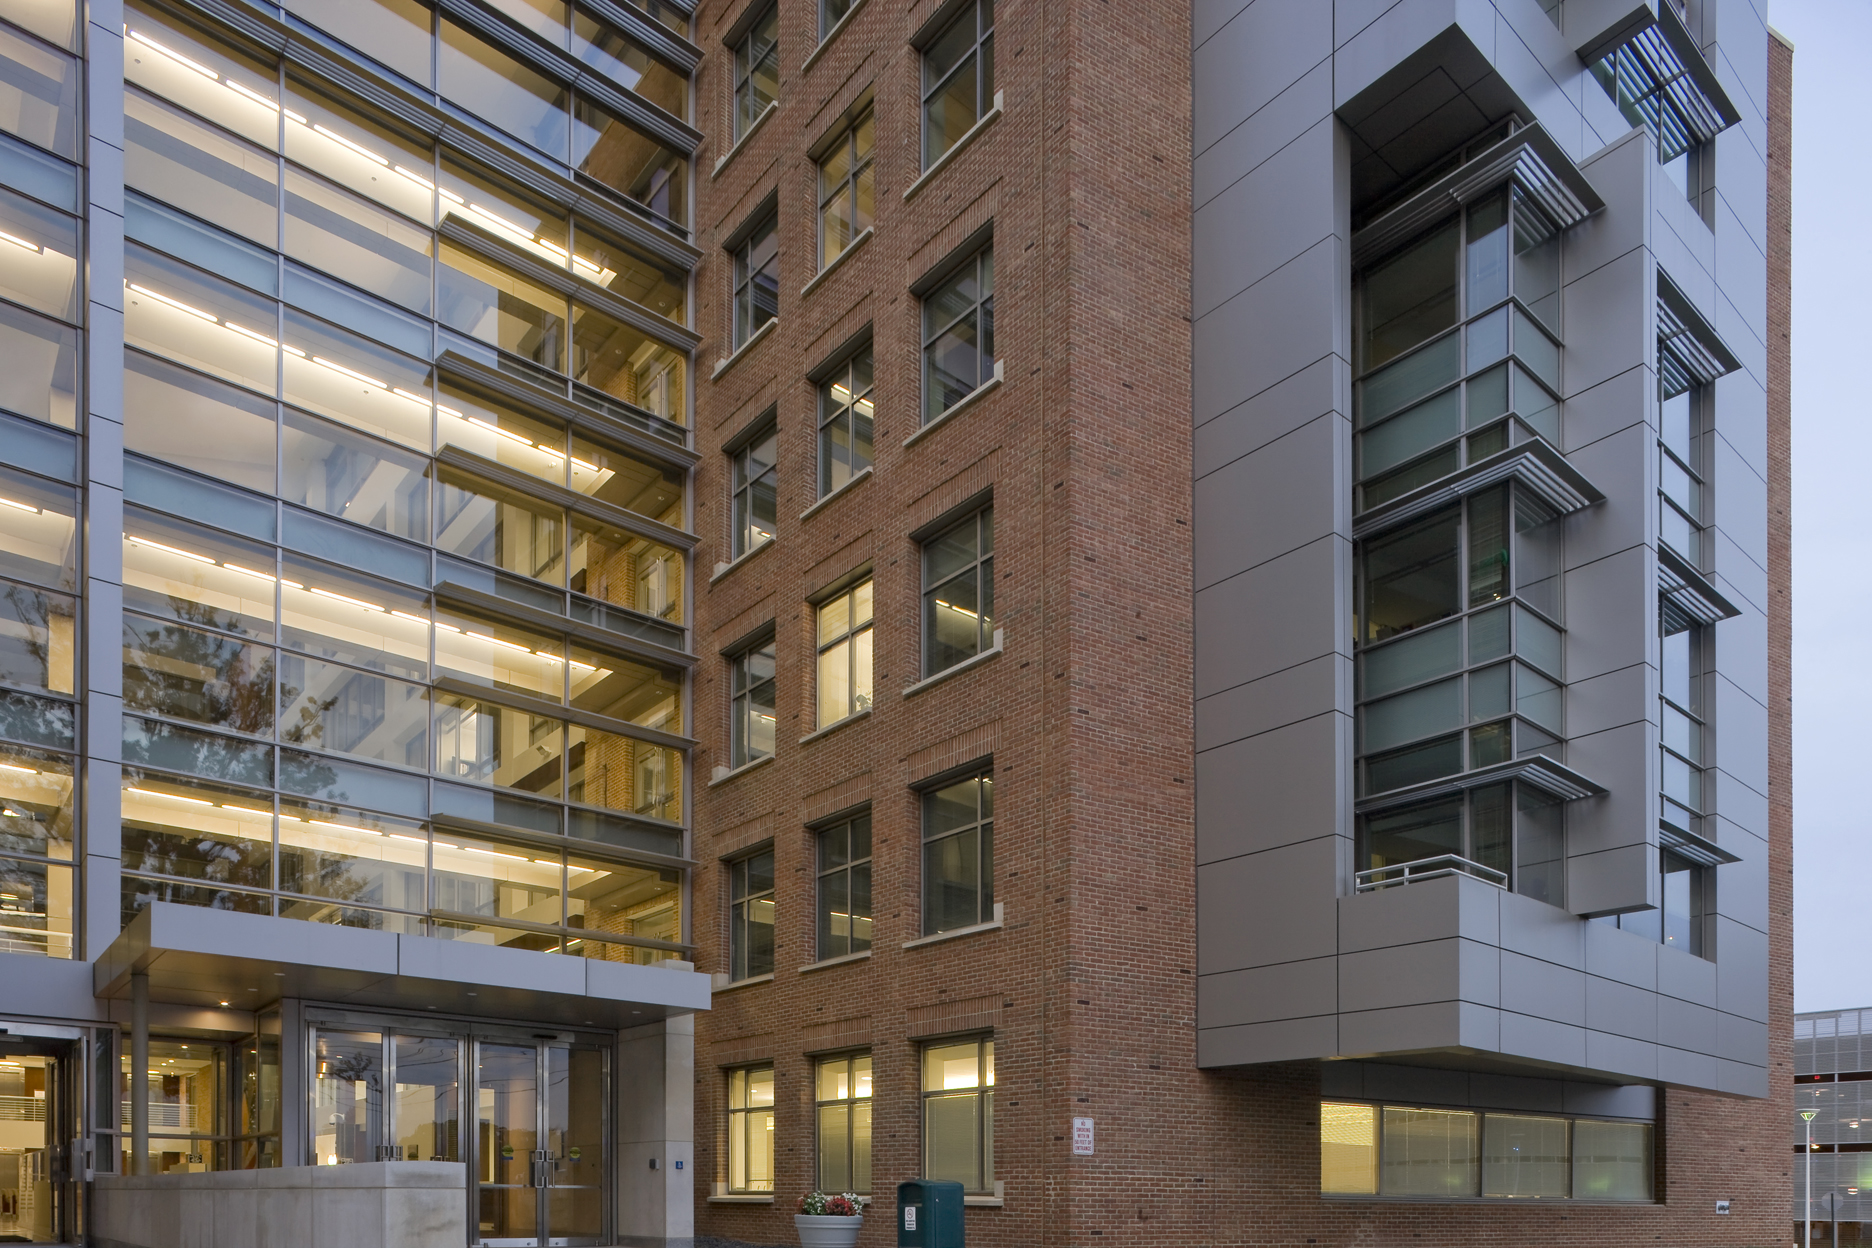 FDA Building 51 houses the Center for Drug Evaluation and Research